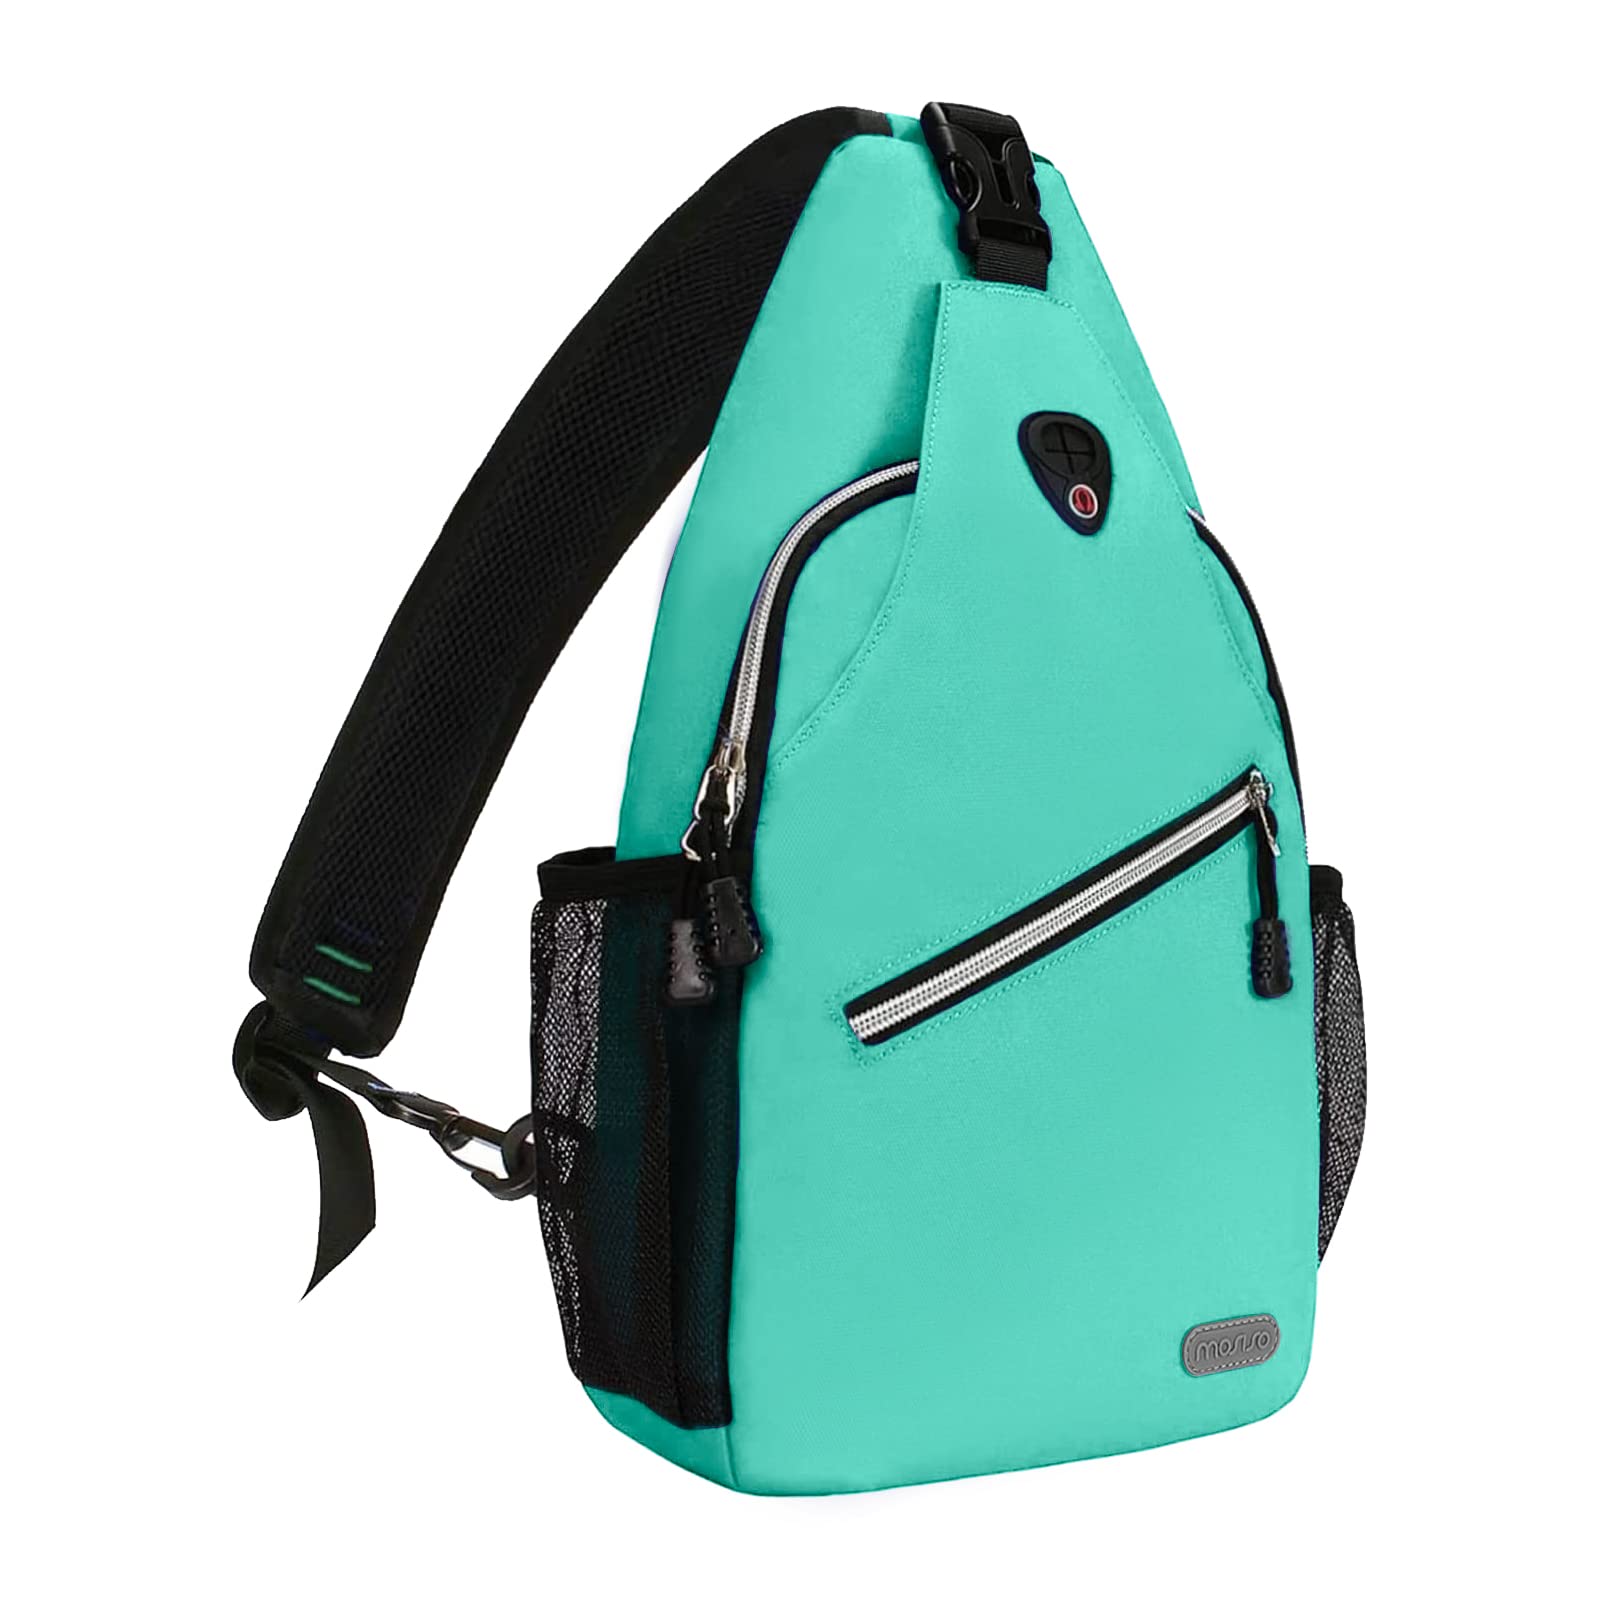 MOSISO Mini Sling Backpack,Small Hiking Daypack Travel Outdoor Casual Sports Bag